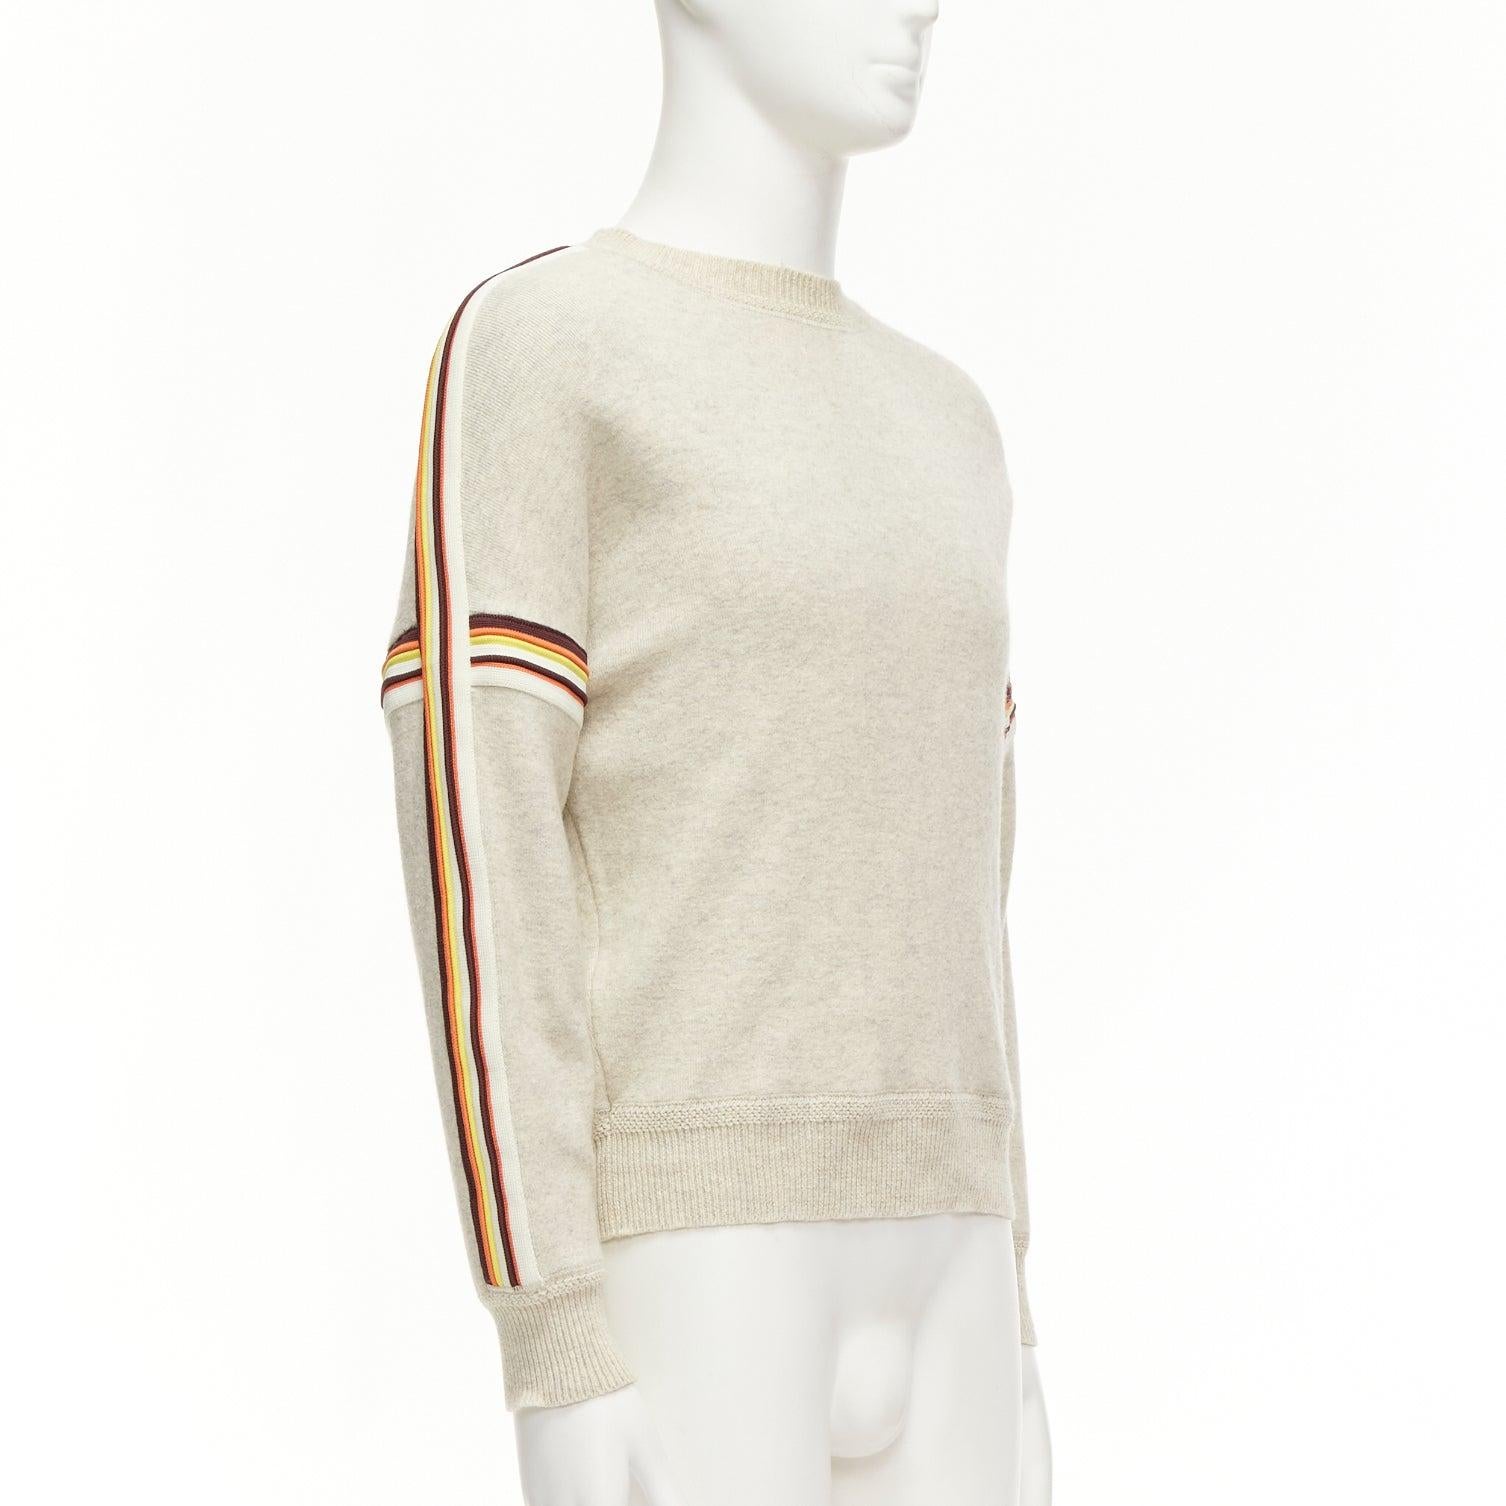 ISABEL MARANT Nelson grey melange cotton striped trim sweatshirt S
Reference: MLCO/A00009
Brand: Isabel Marant
Model: Nelson
Material: Cotton, Blend
Color: Grey, Multicolour
Pattern: Striped
Closure: Pullover
Made in: China

CONDITION:
Condition: